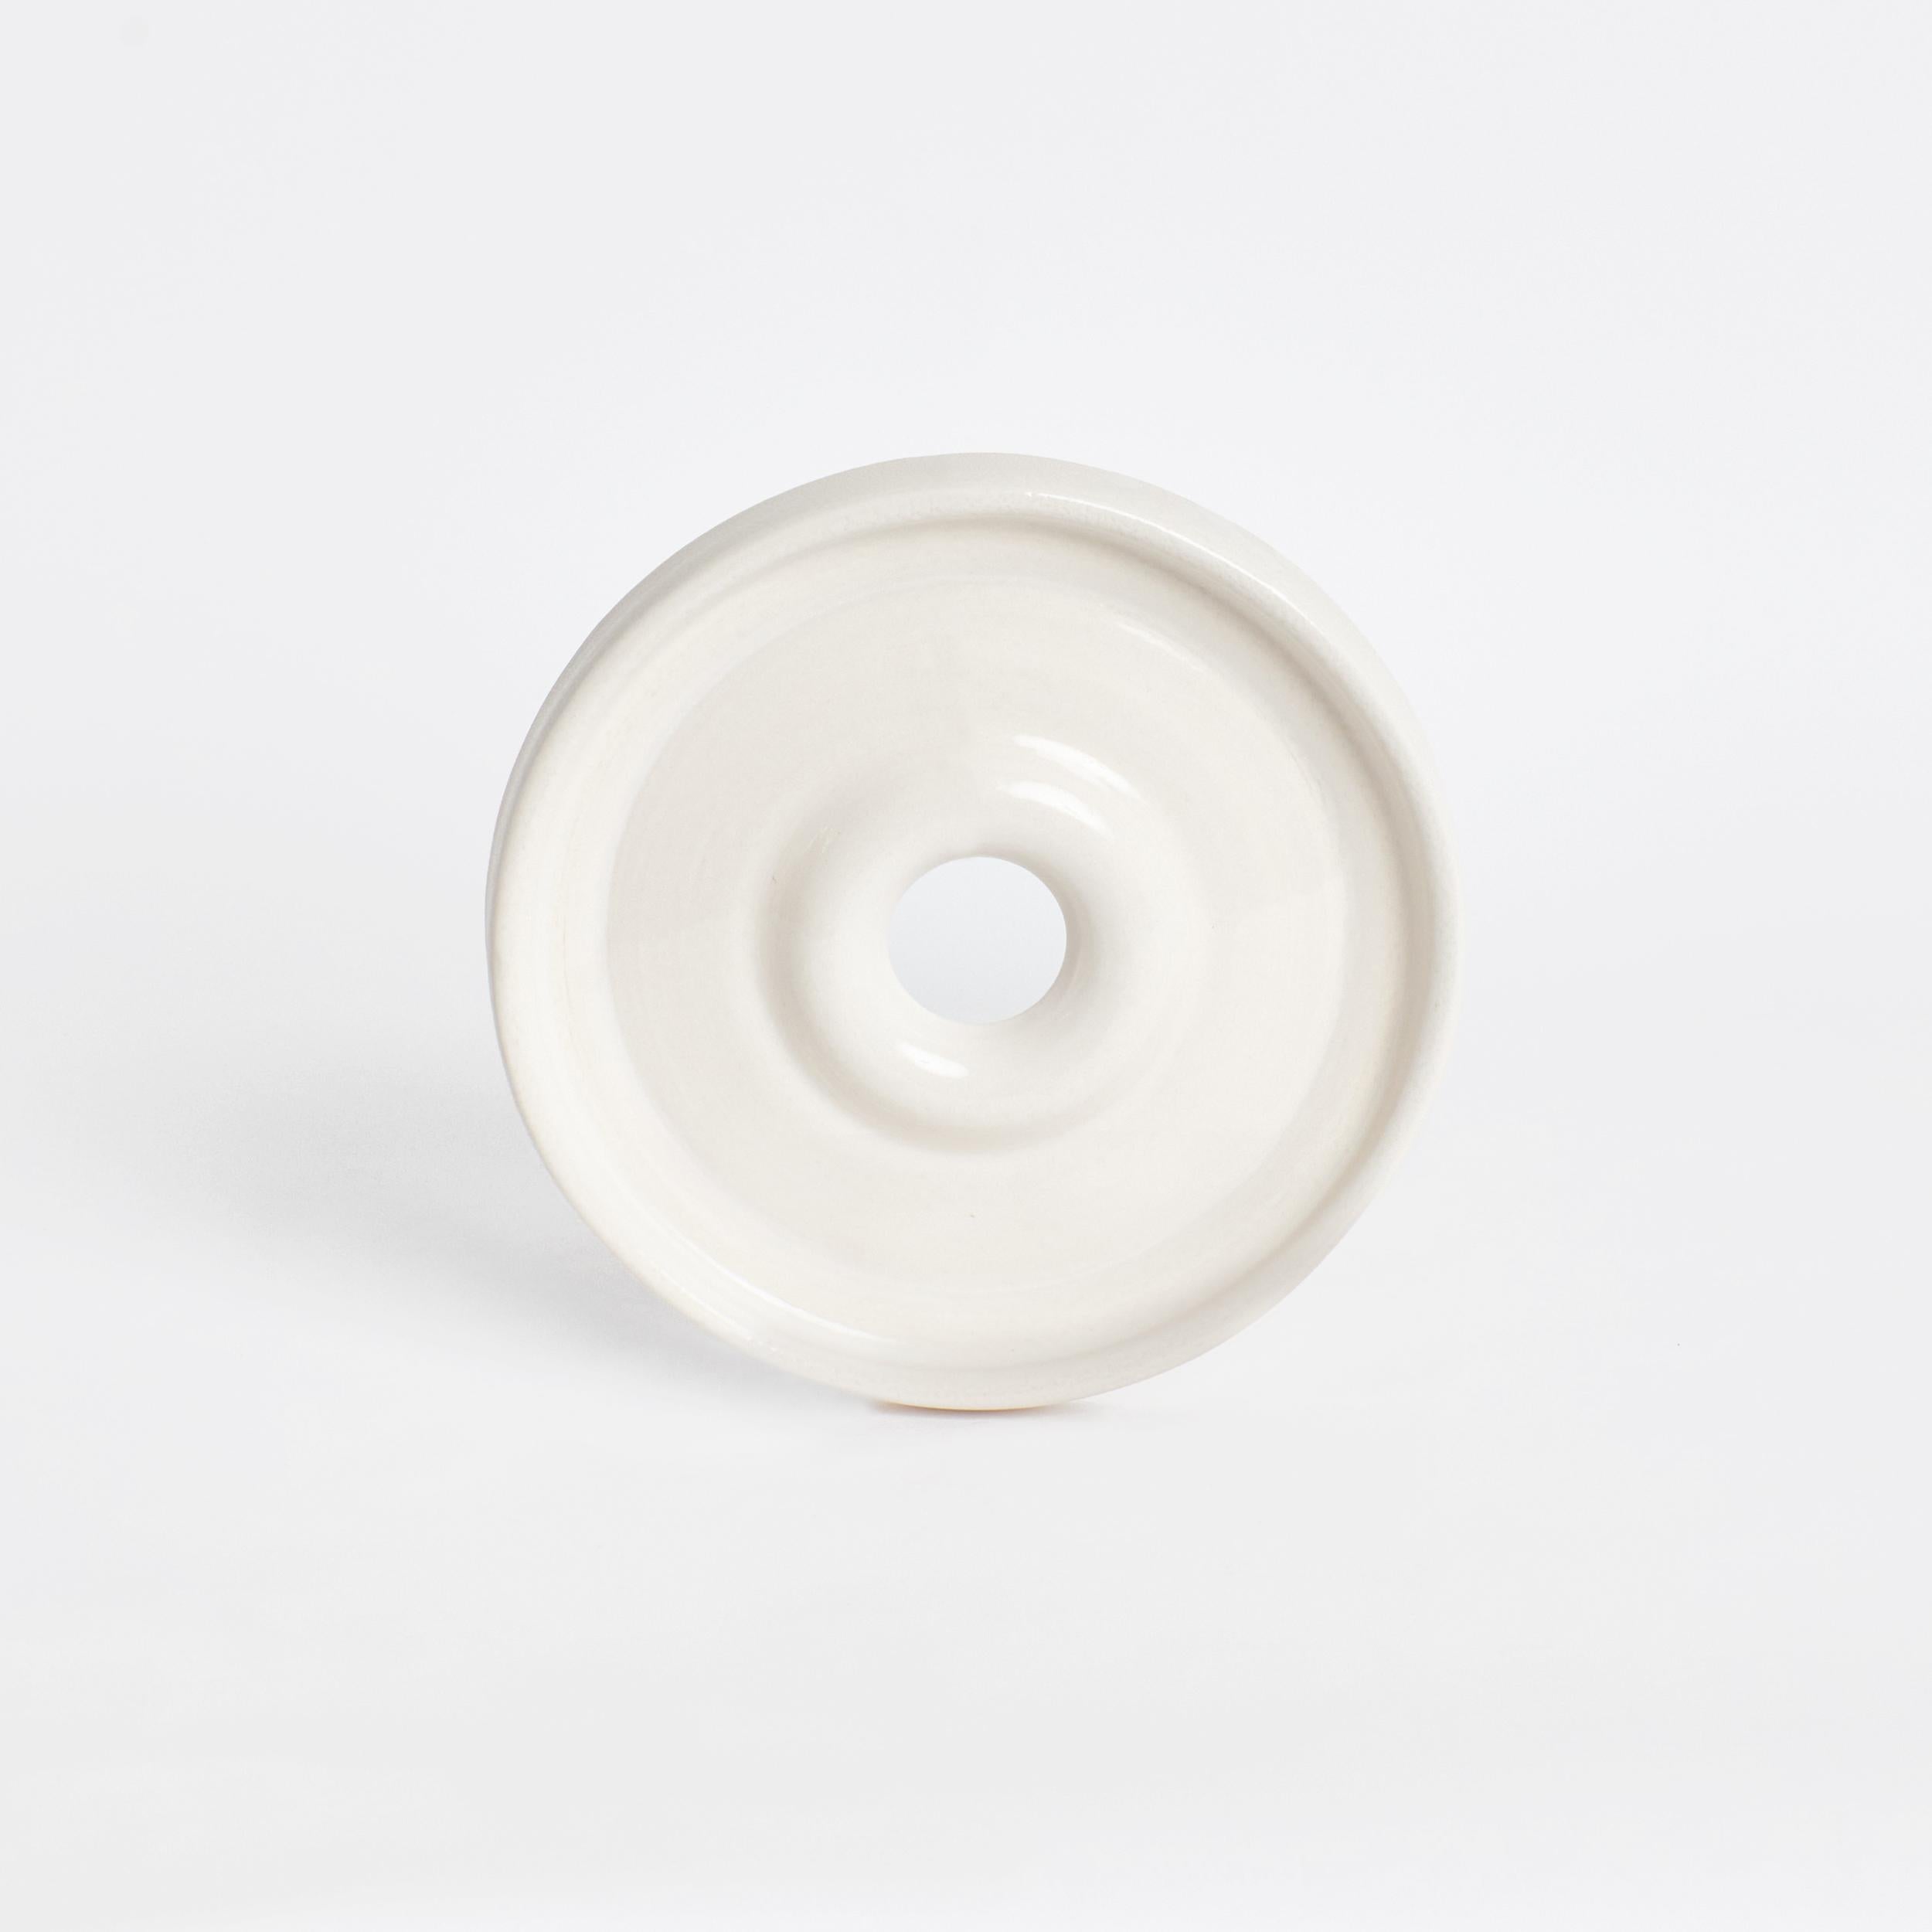 Portuguese Aveiro Plate in Cream by Project 213A